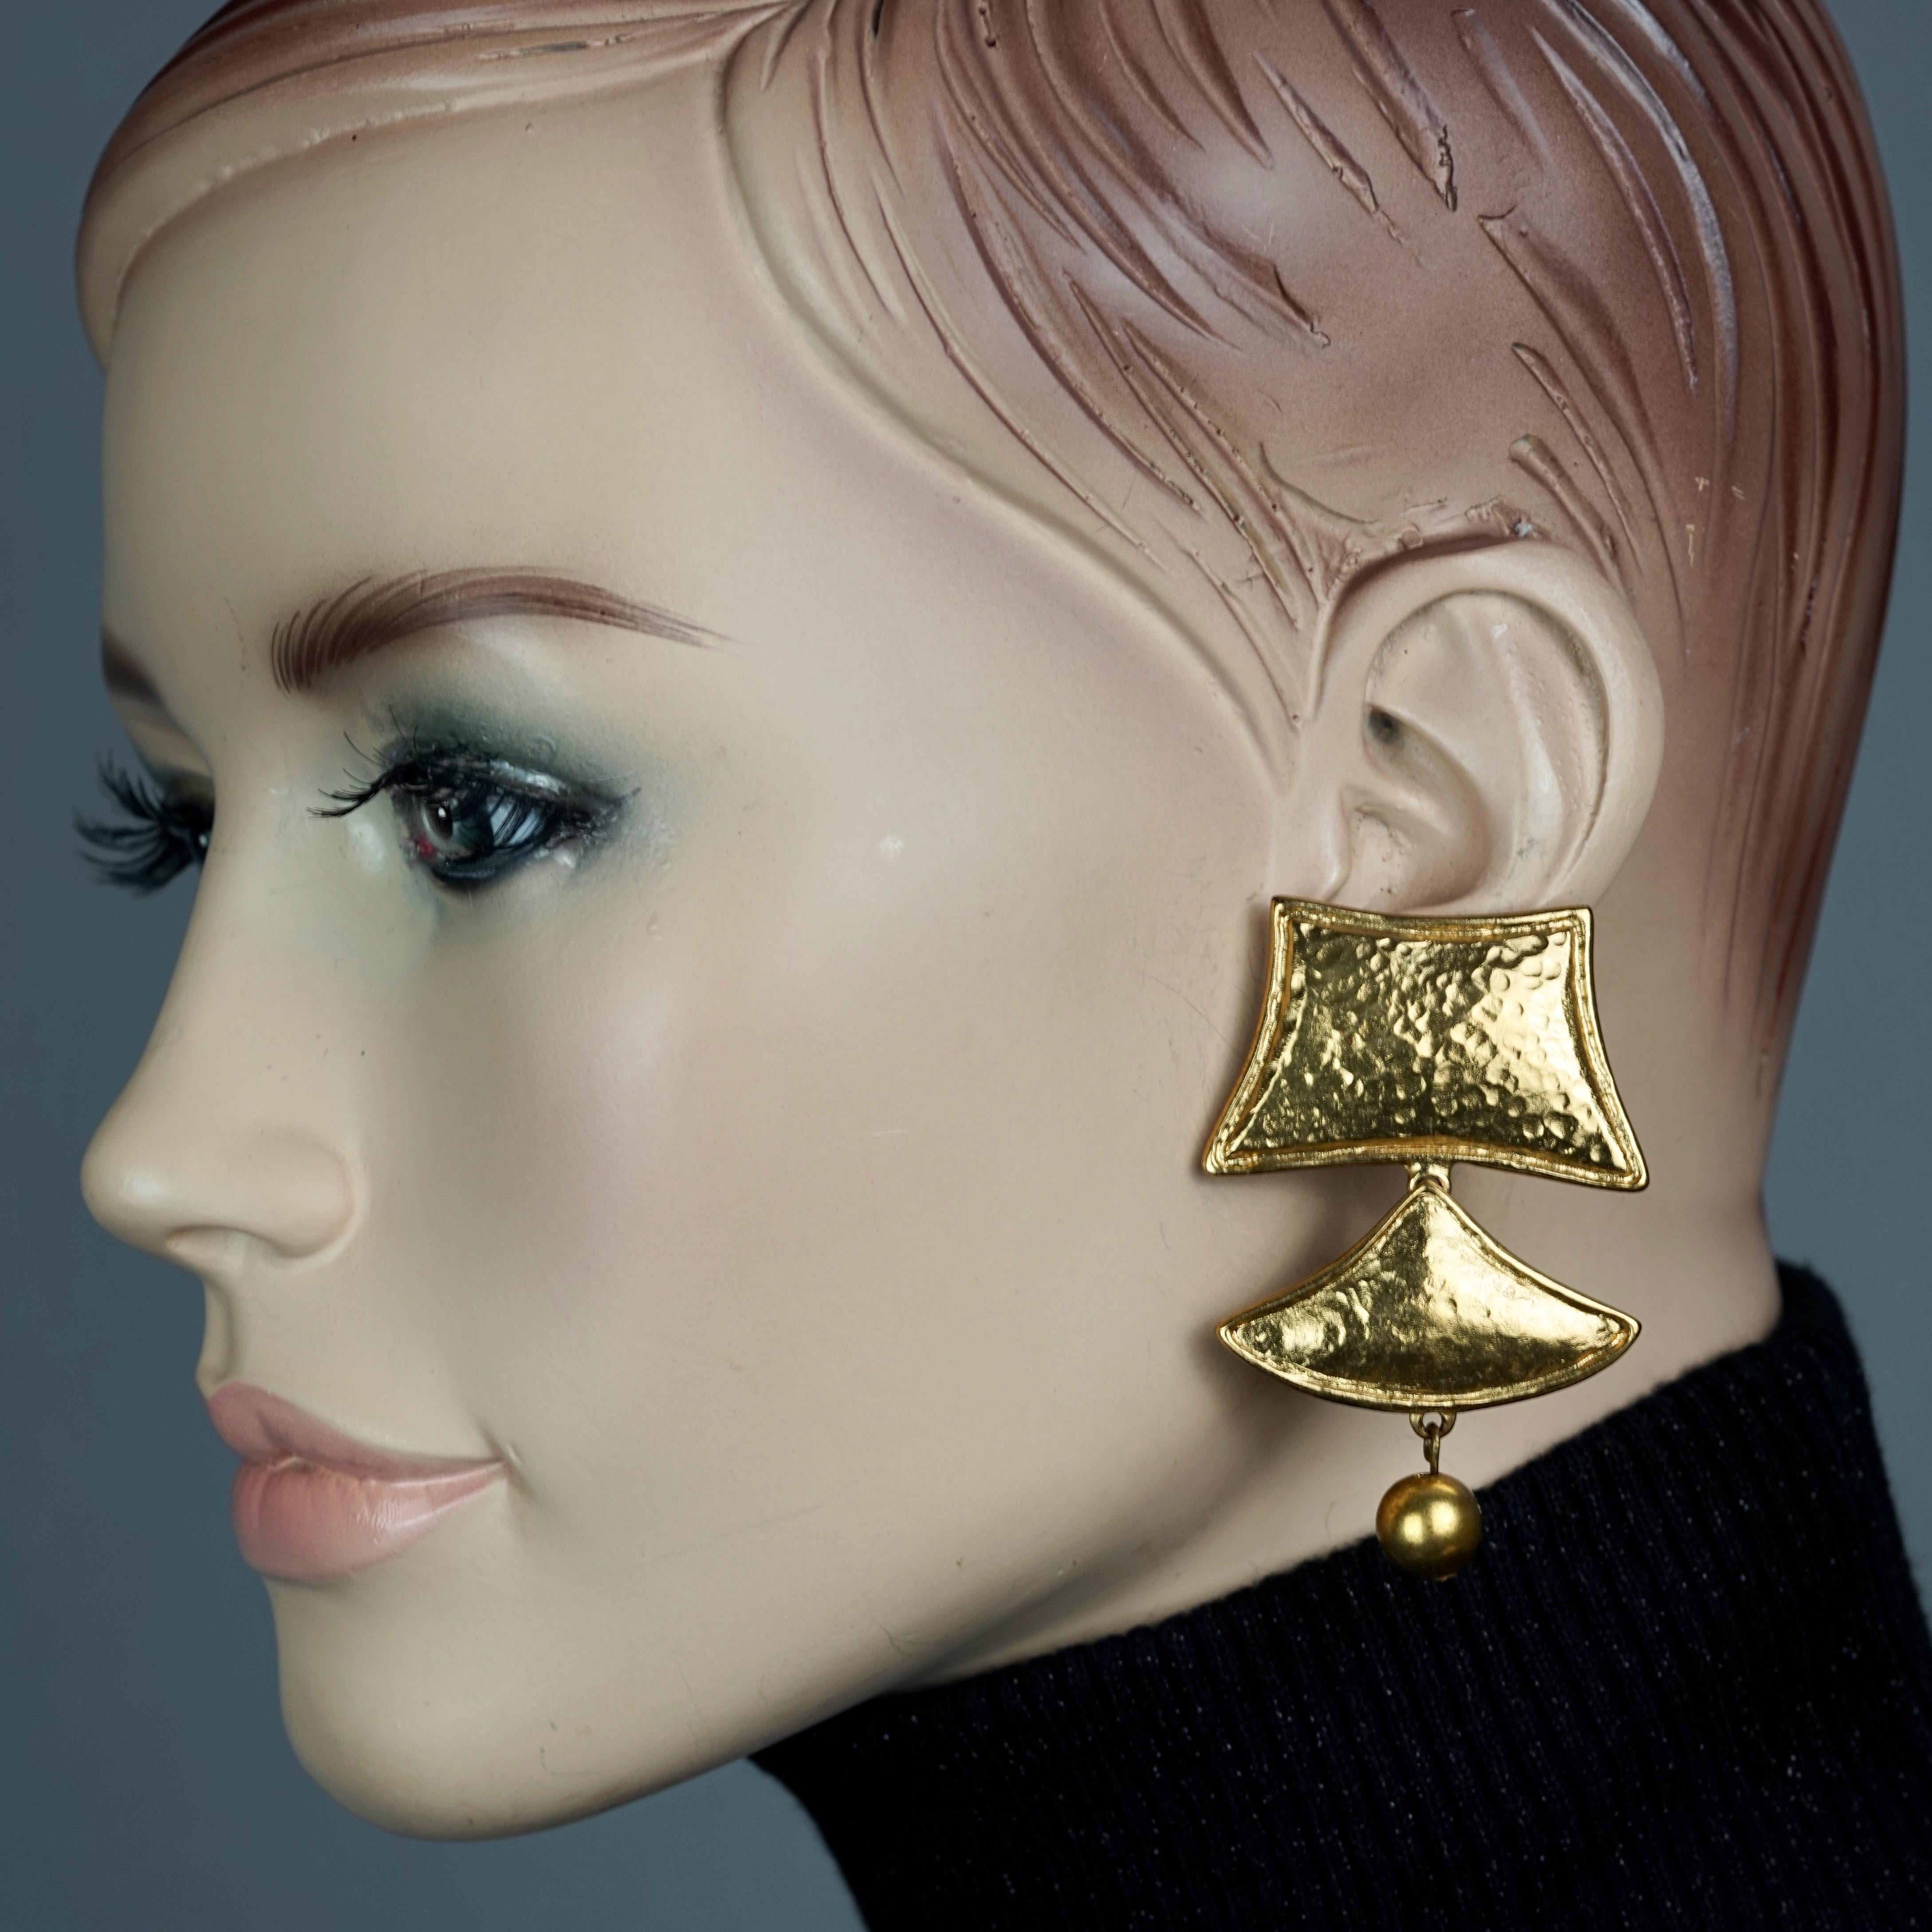 Vintage YVES SAINT LAURENT Ysl Geometric Tiered Earrings

Measurements:
Height: 2.44 inches (6.2 cm)
Width: 1.65 inches (4.2 cm)
Weight per Earring: 22 grams

Features:
- 100% Authentic YVES SAINT LAURENT.
- 3 Tiered hammered gilt geometric dangling